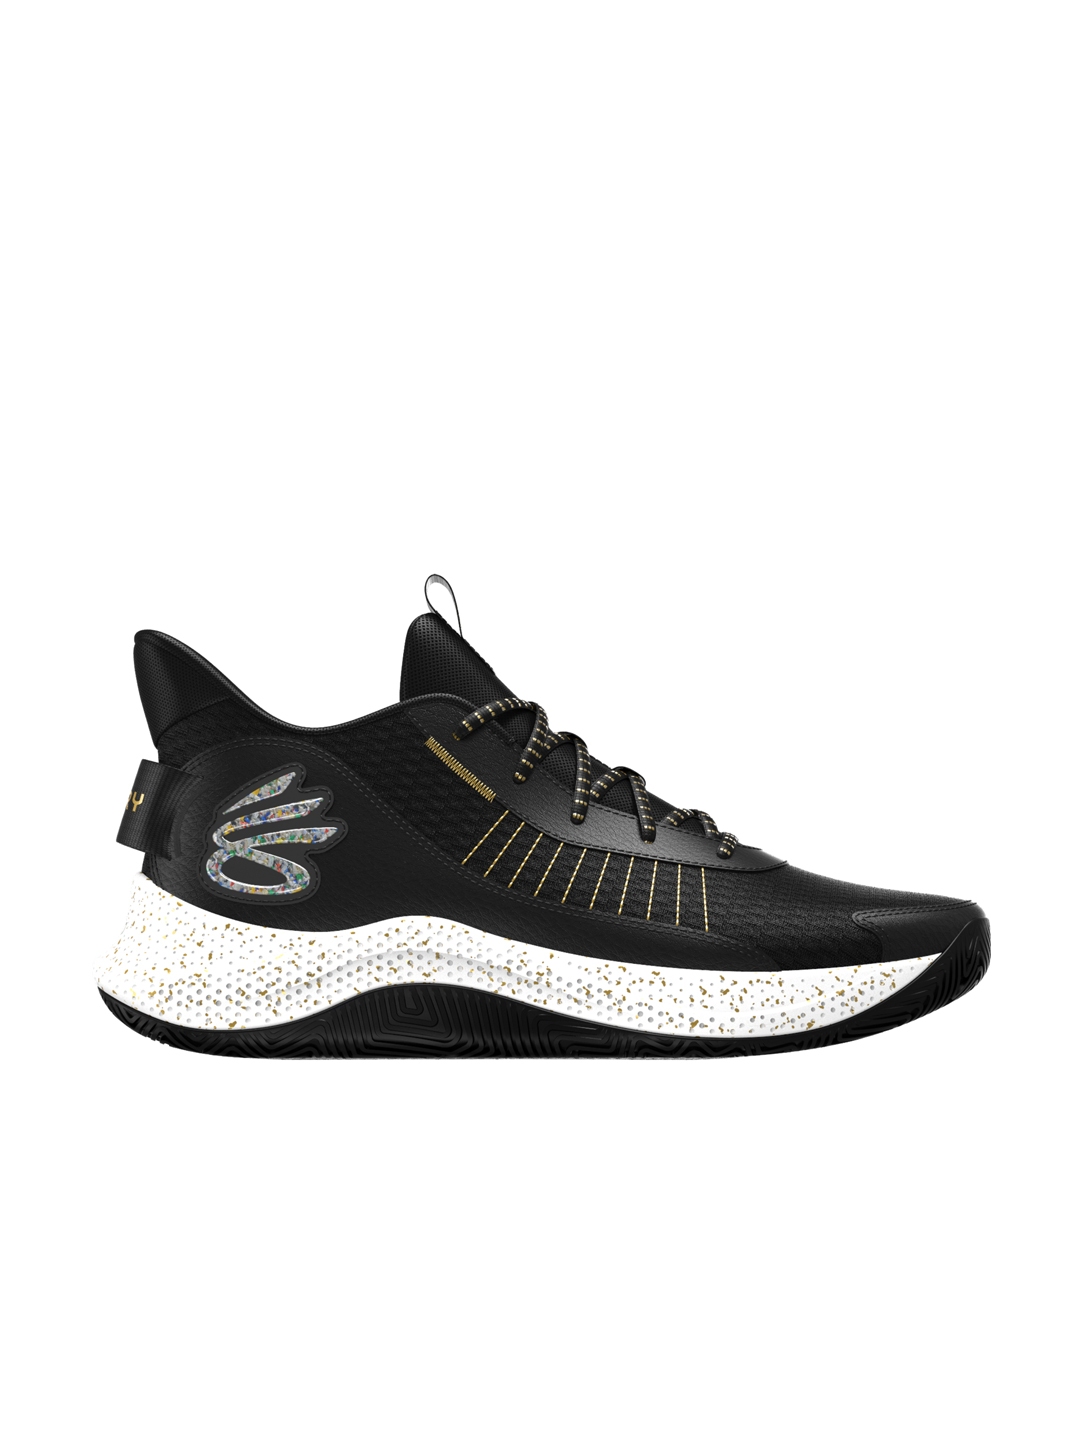 Buy UNDER ARMOUR Unisex Curry 327 Leather Basketball Shoes - Sports ...